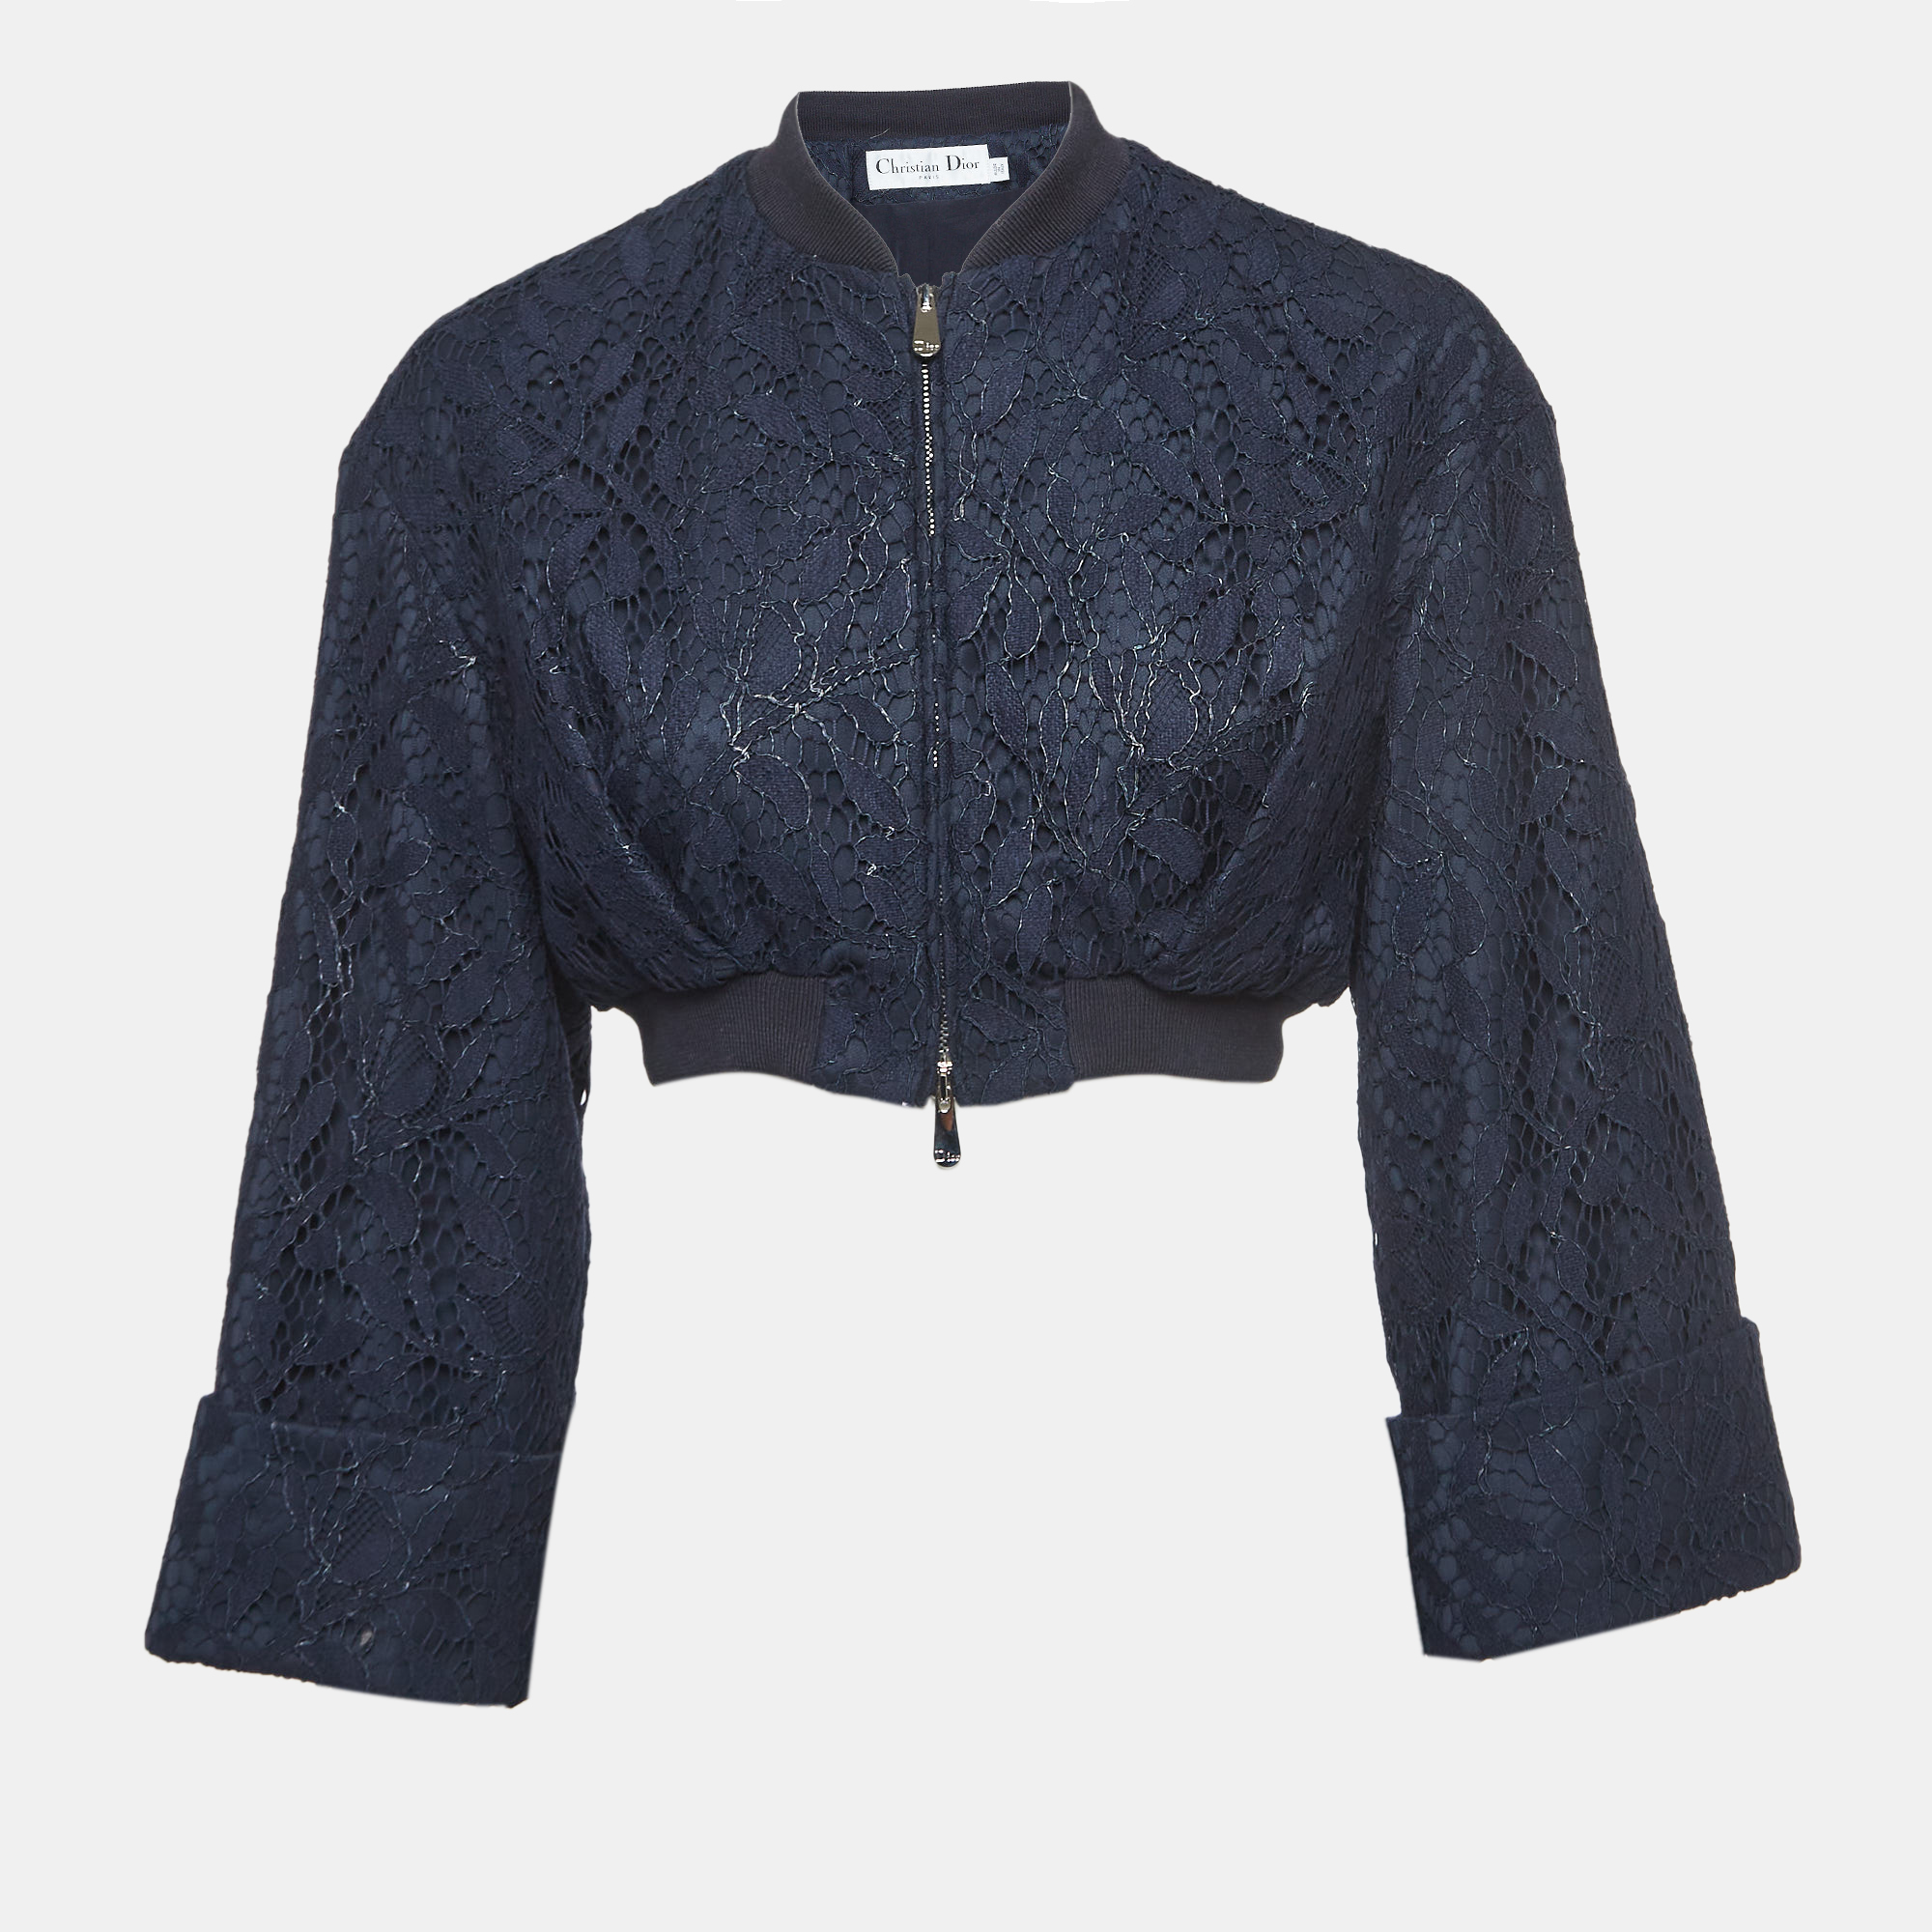 Christian dior navy blue floral lace cropped jacket m